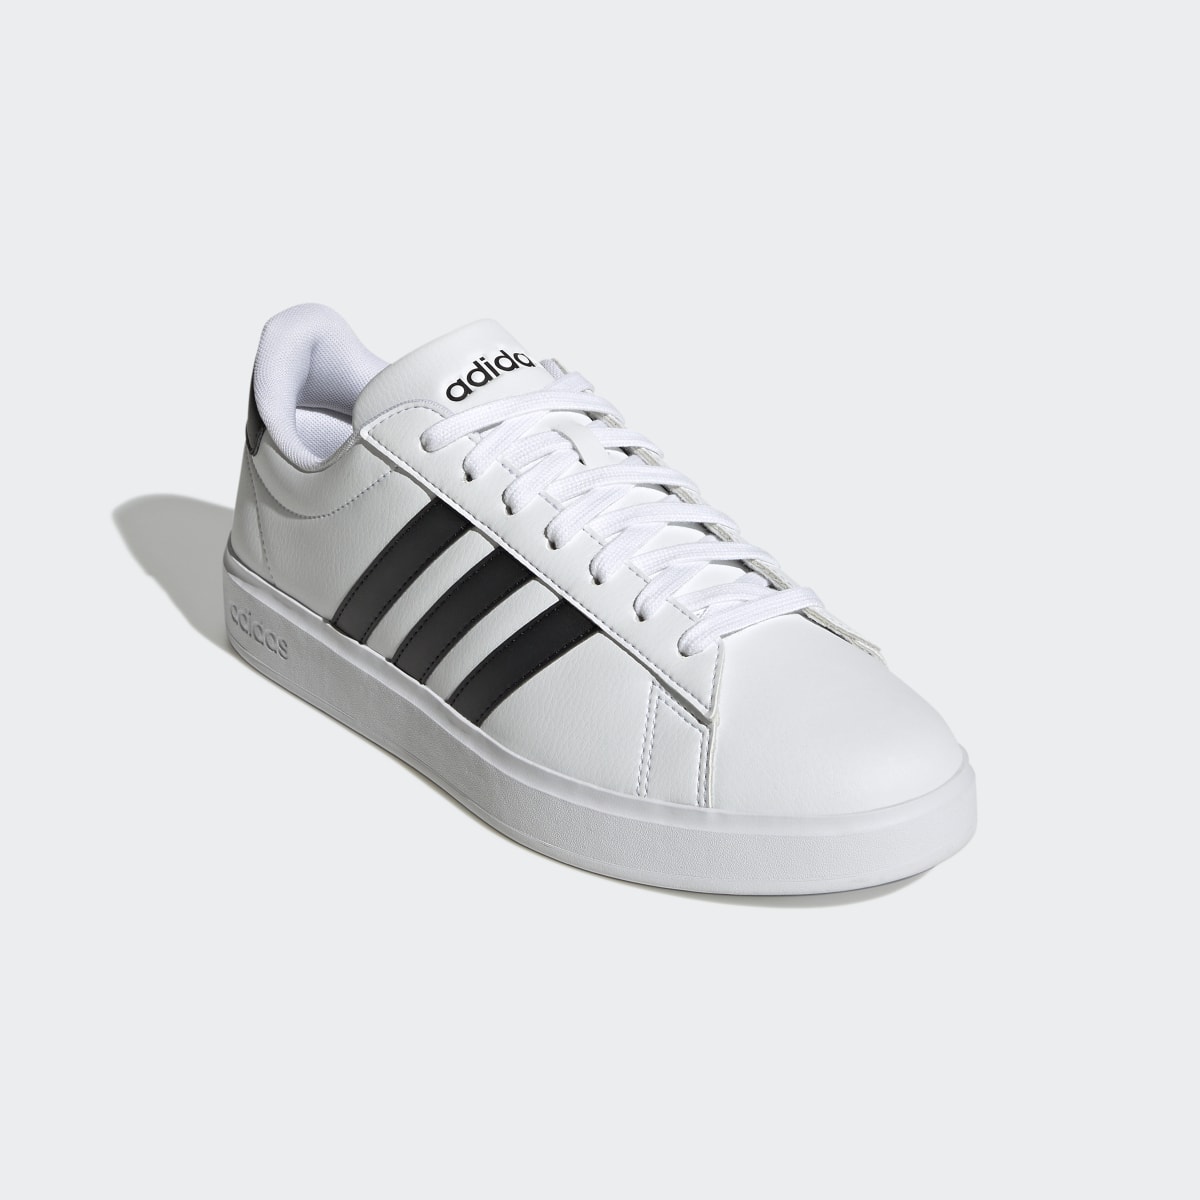 Adidas Grand Court 2.0 Shoes. 5